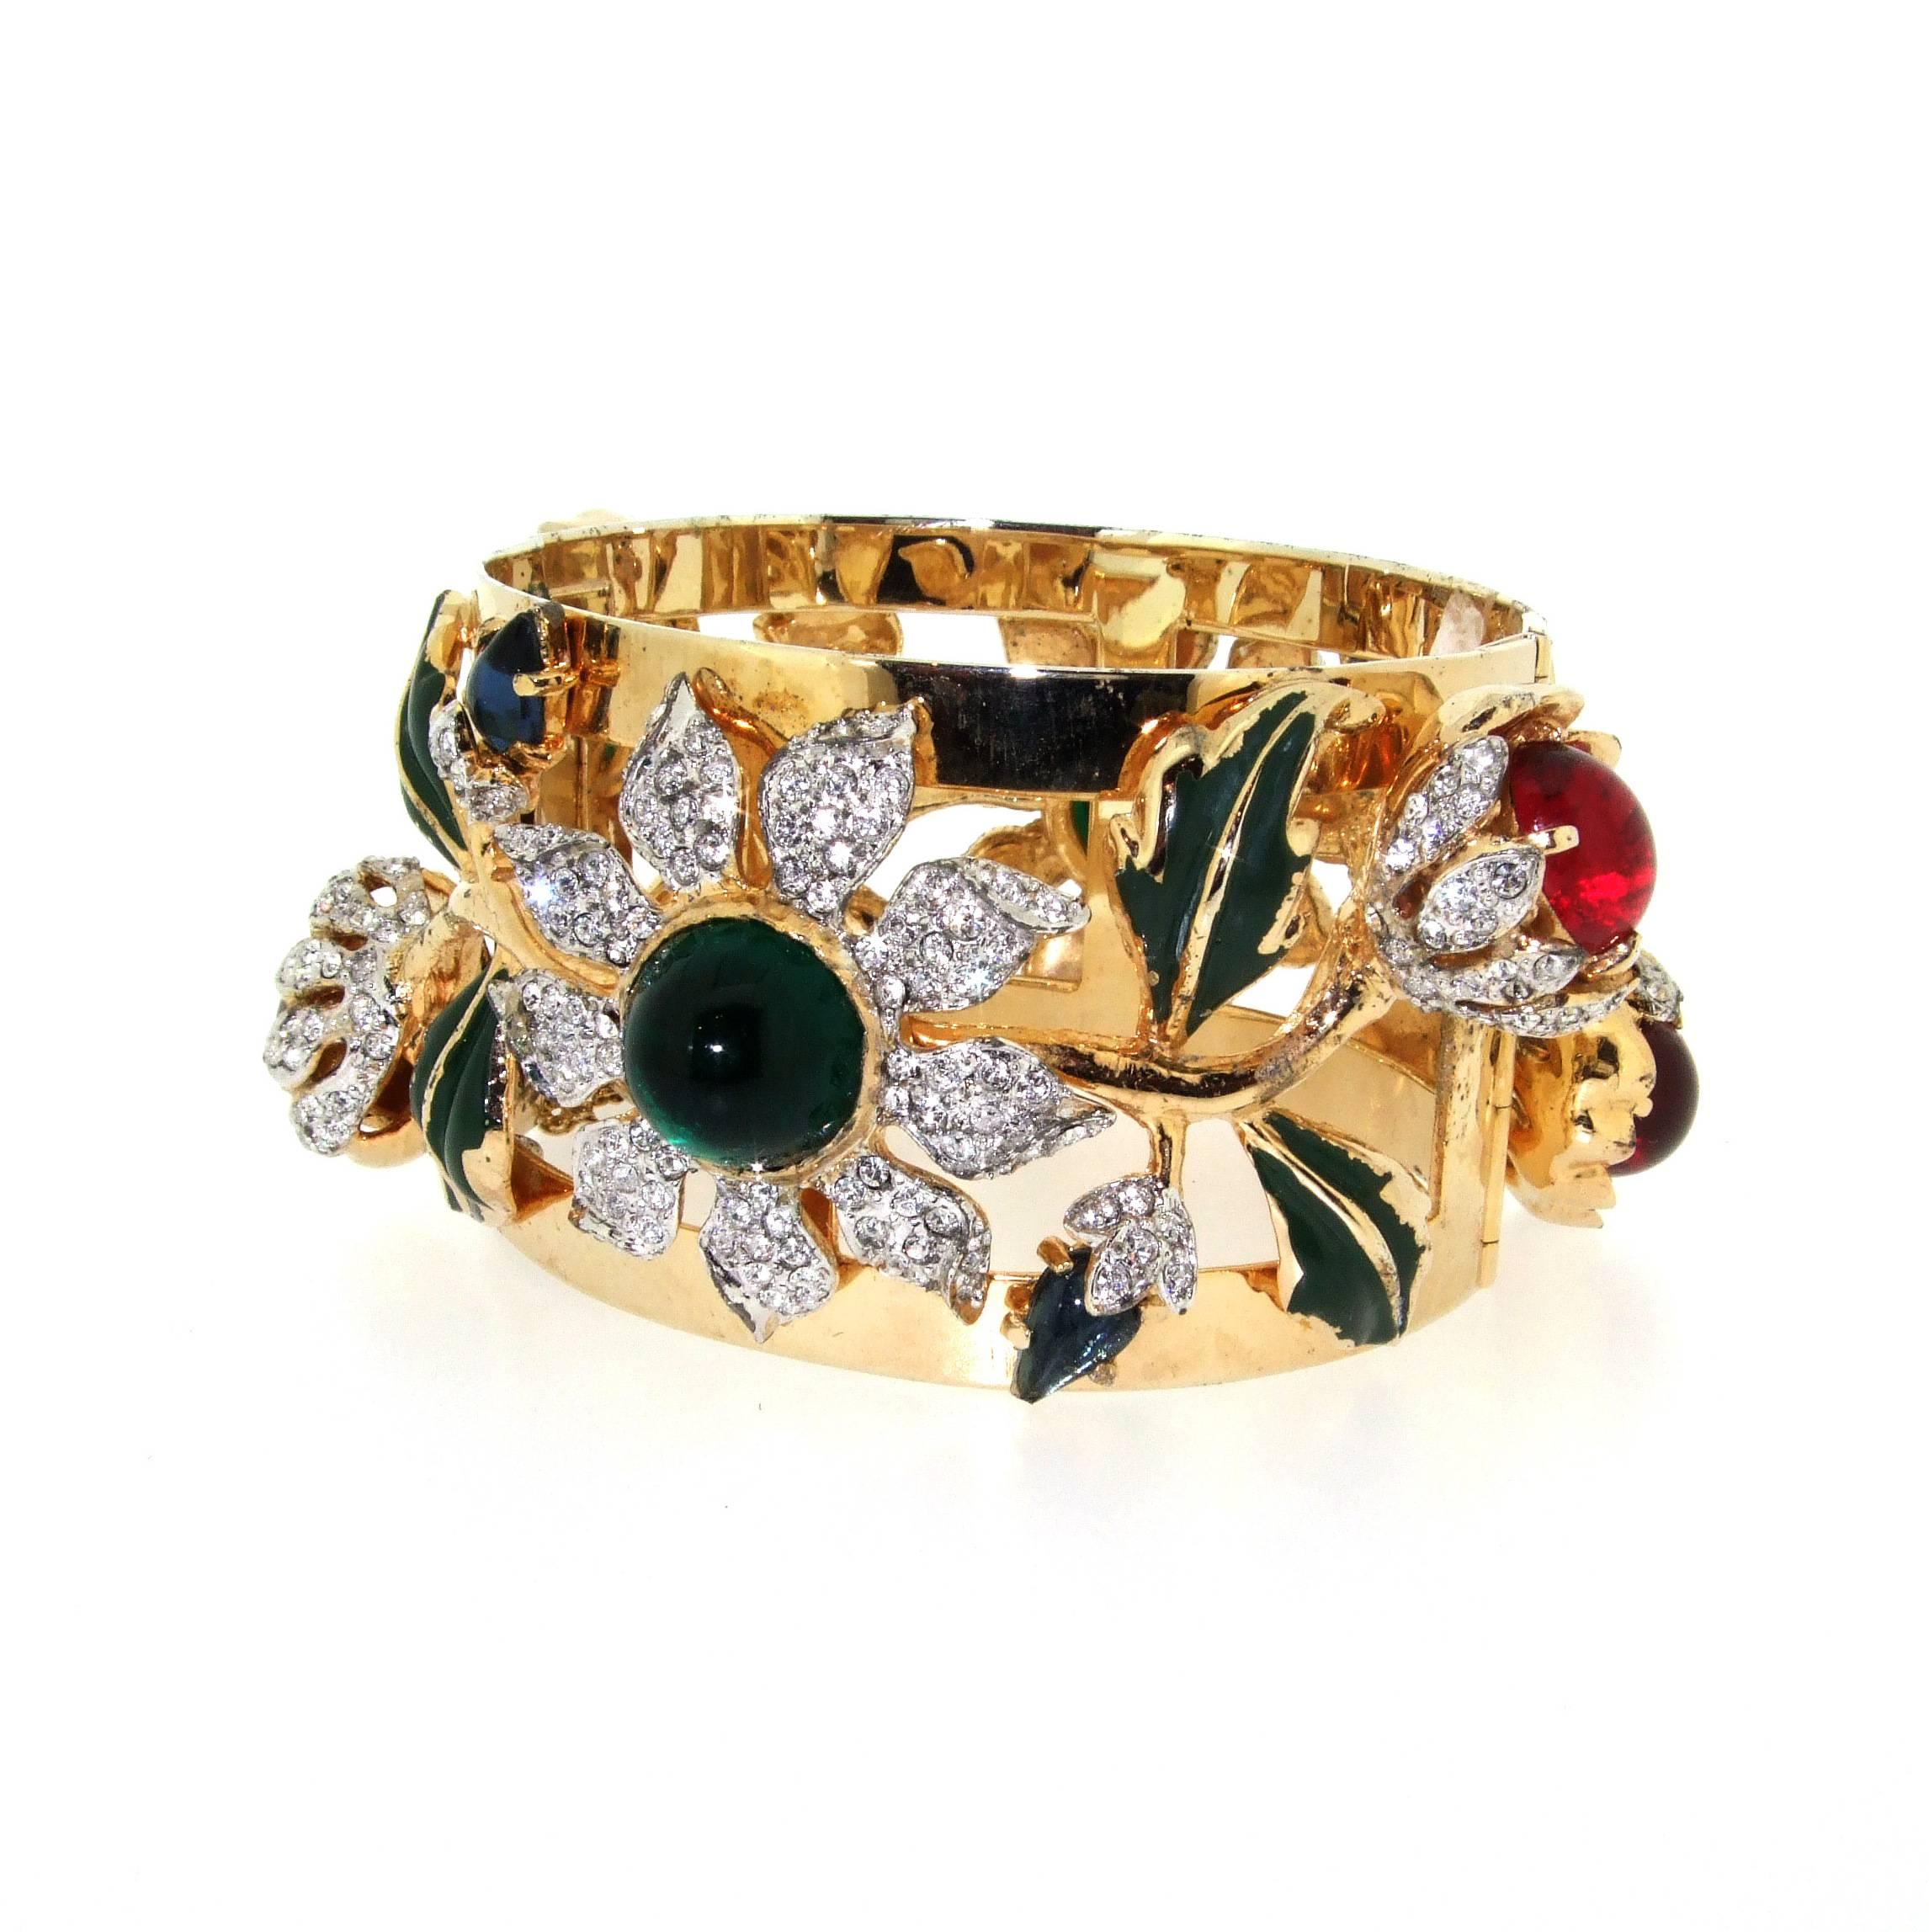 A rare Vintage Cuff Bracelet by Vendome, gold plated and set with glass and crystals, with green handpainted leaves. It is considered to be a costume version of the gold, diamond and emerald bracelet given to Paulette Rowe by her husband Charlie